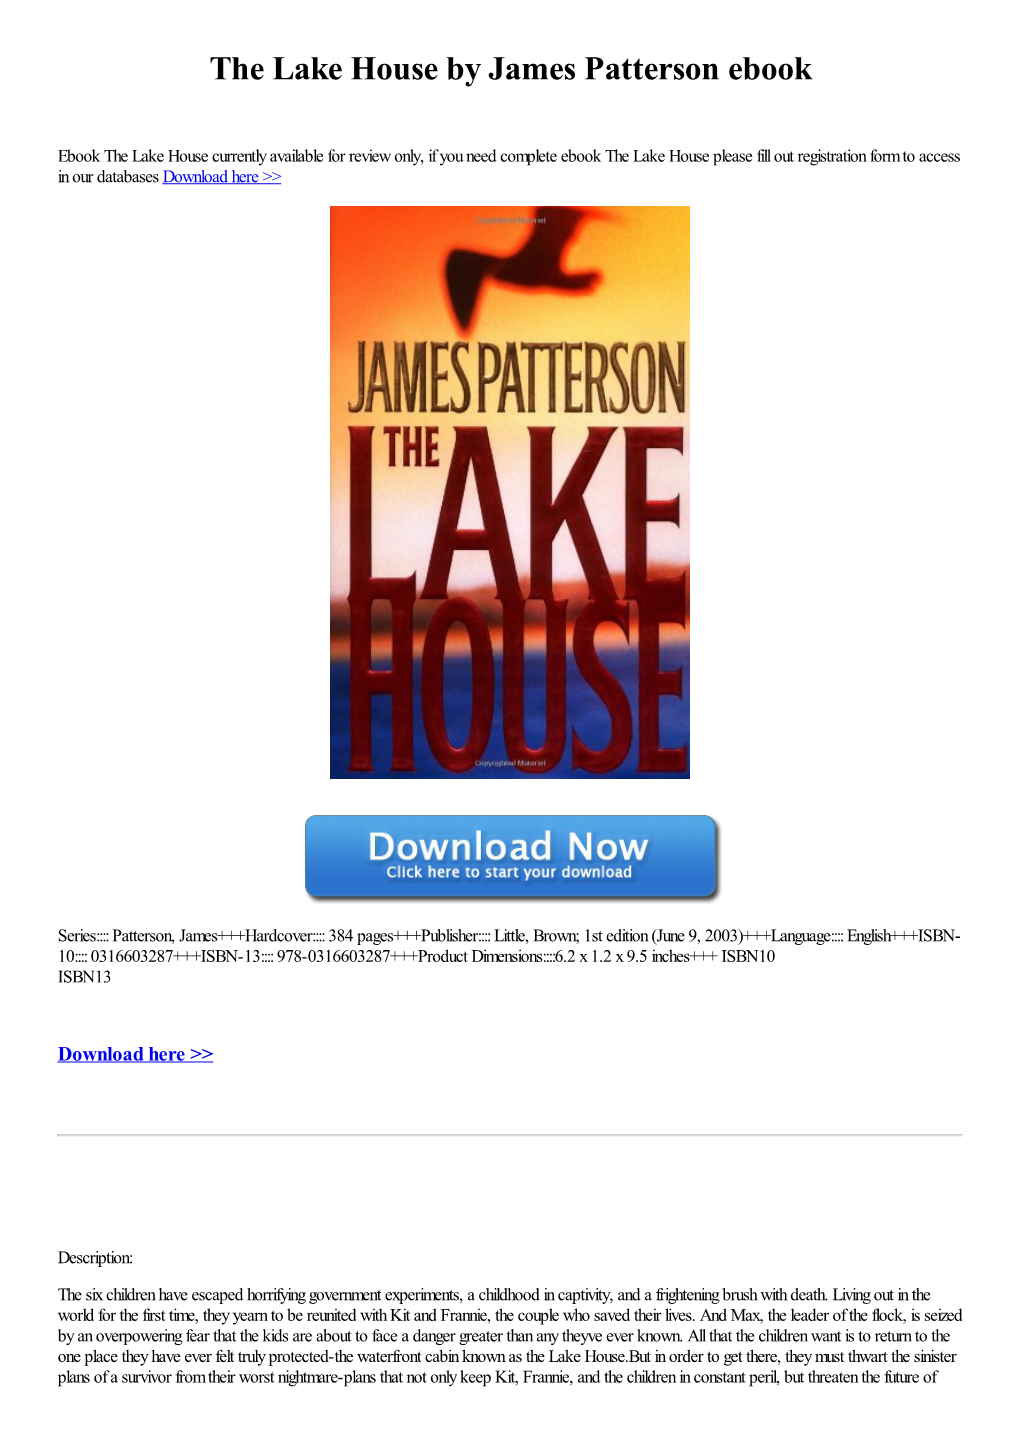 The Lake House by James Patterson Ebook